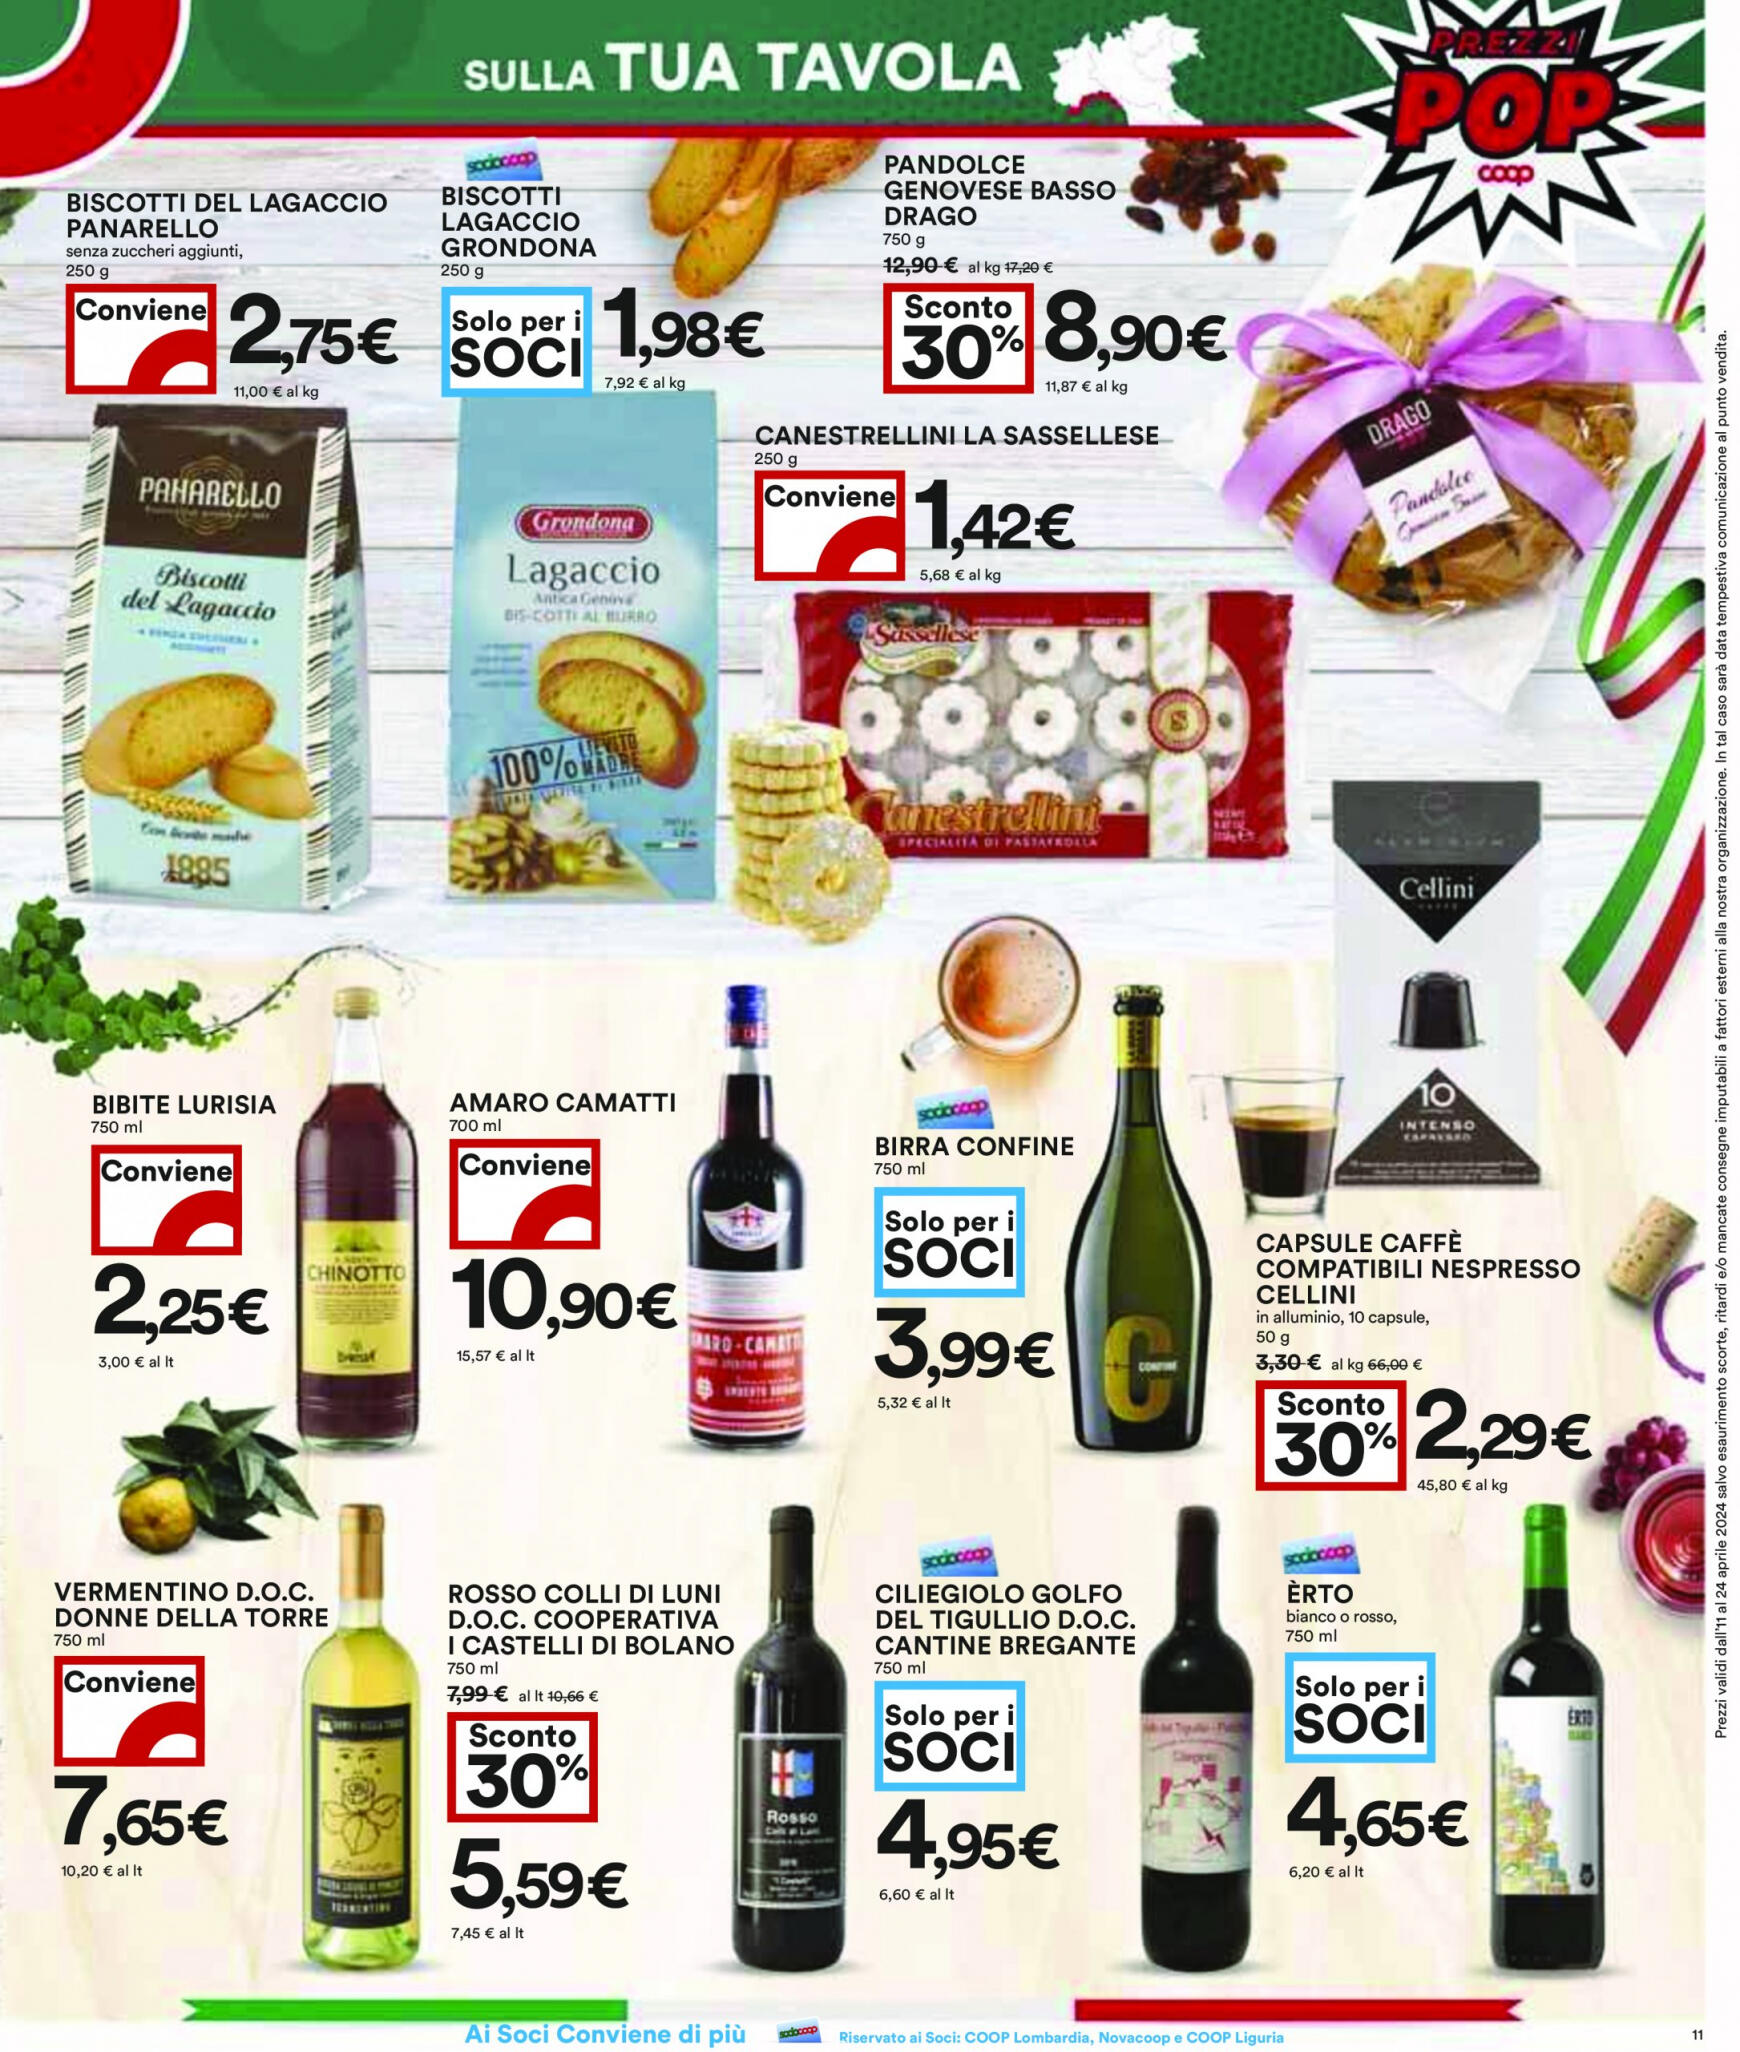 coop - Nuovo volantino Coop 11.04. - 24.04. - page: 11